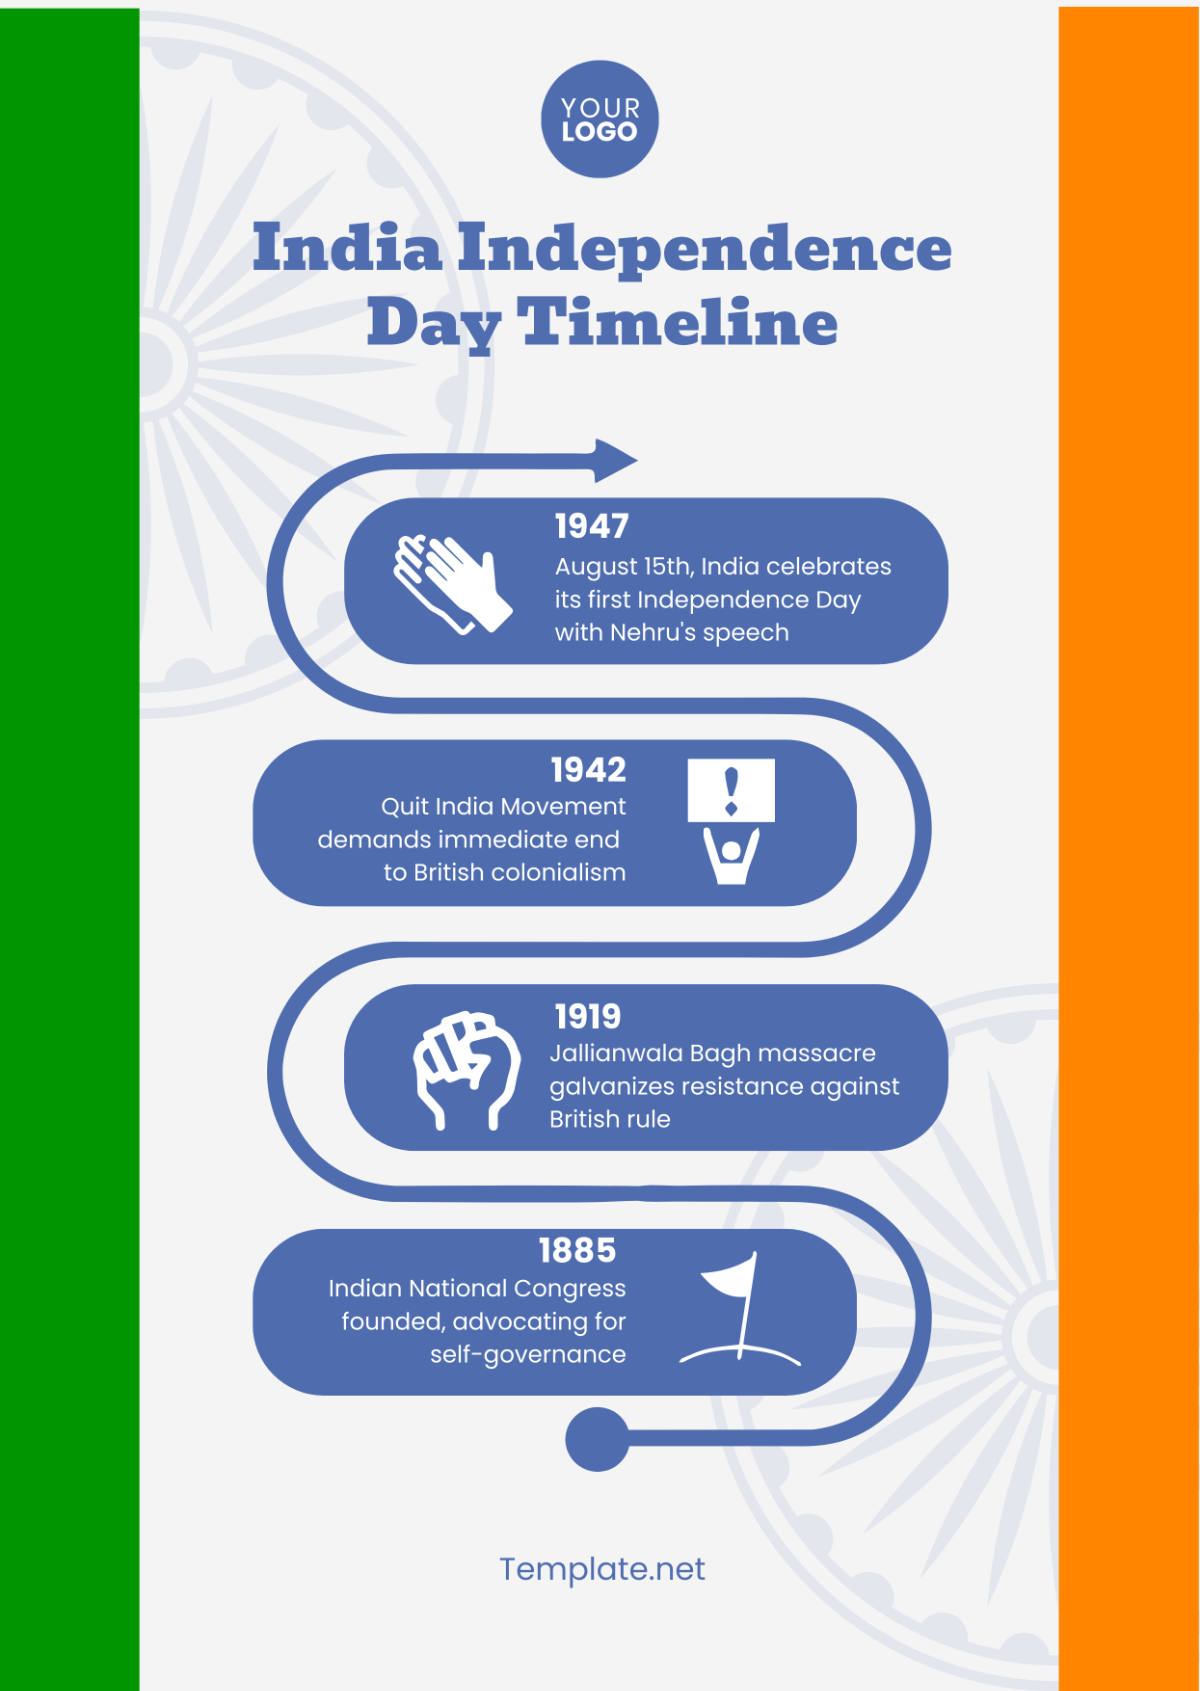 India Independence Day Timeline